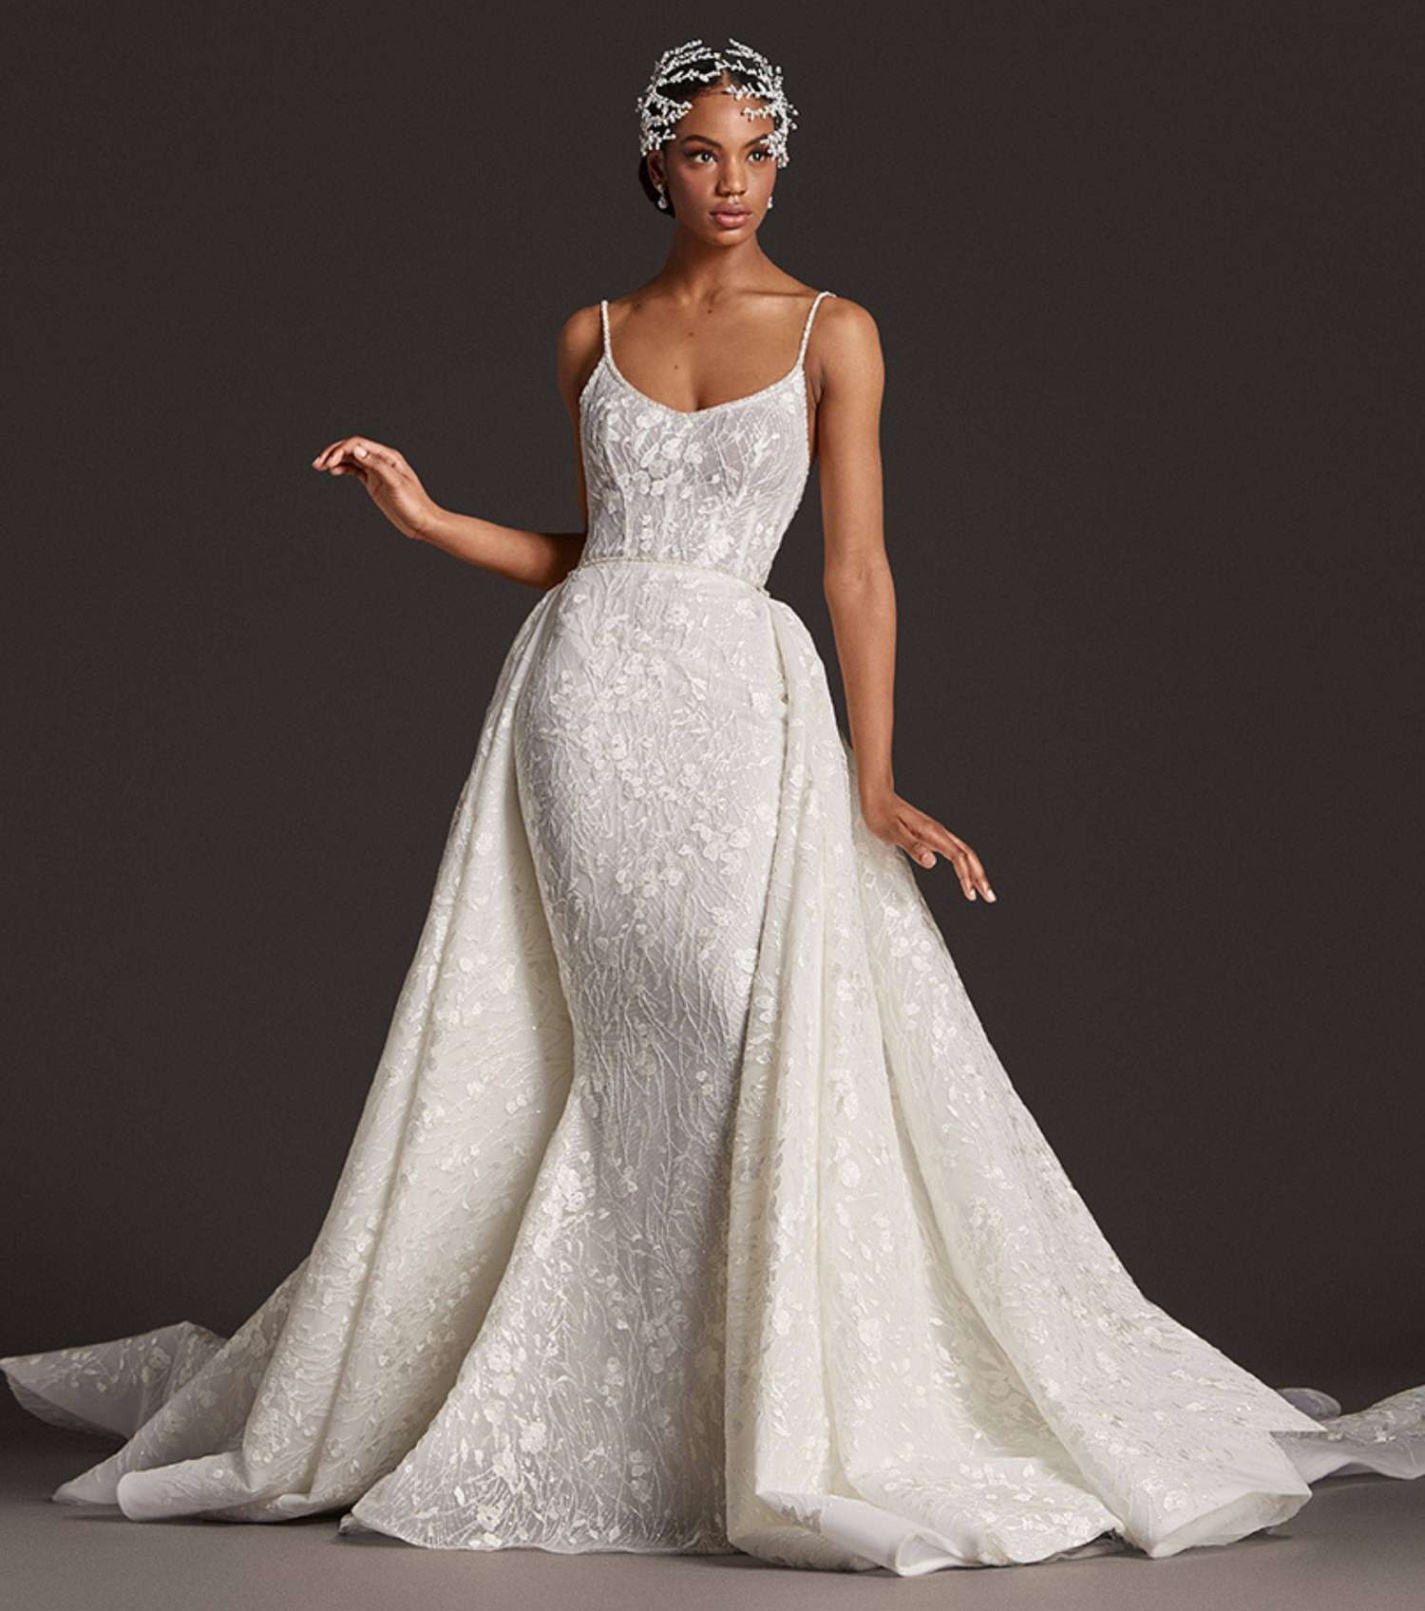 Discover The Top African Wedding Dress Designers Making Waves In The Industry!